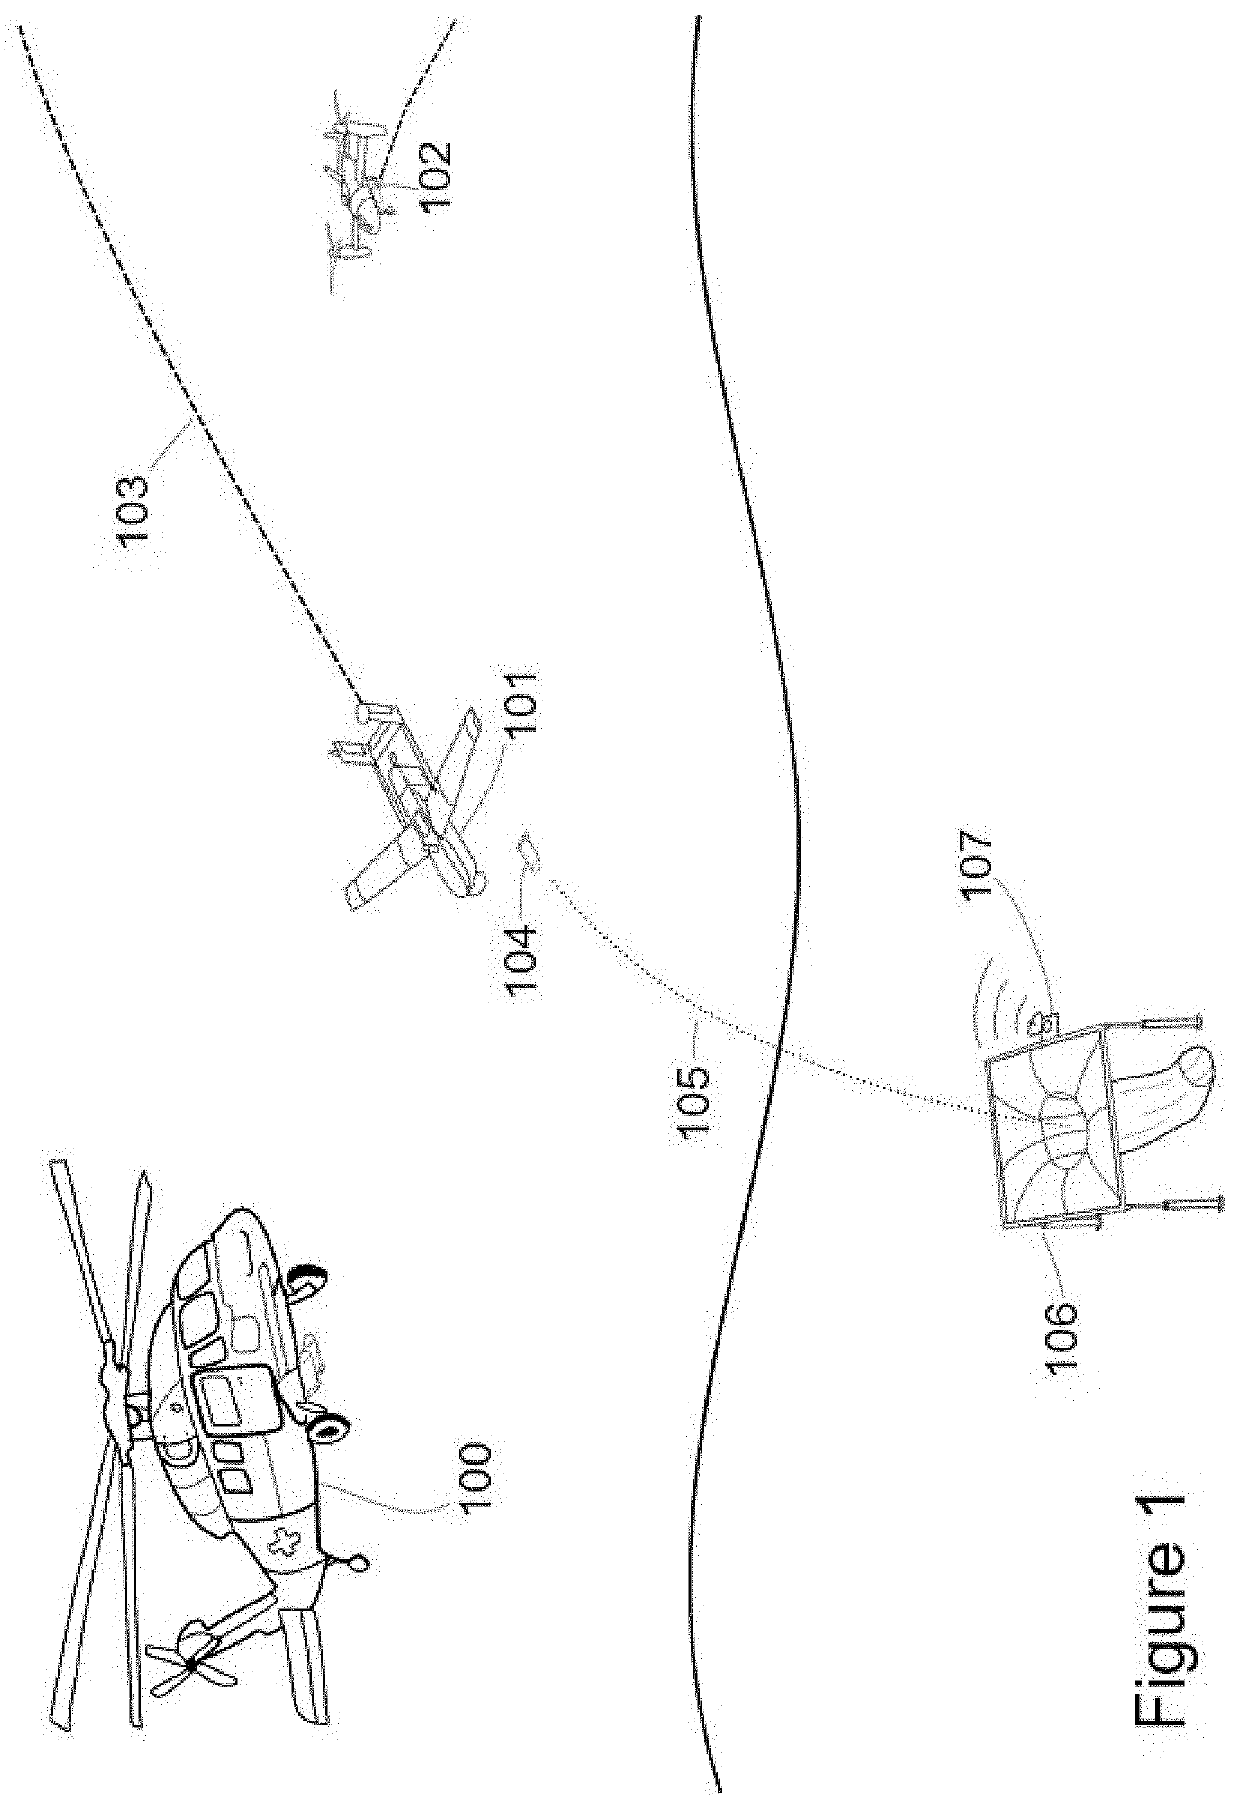 Precision Automated Air-to-Ground Delivery System and Related Methods